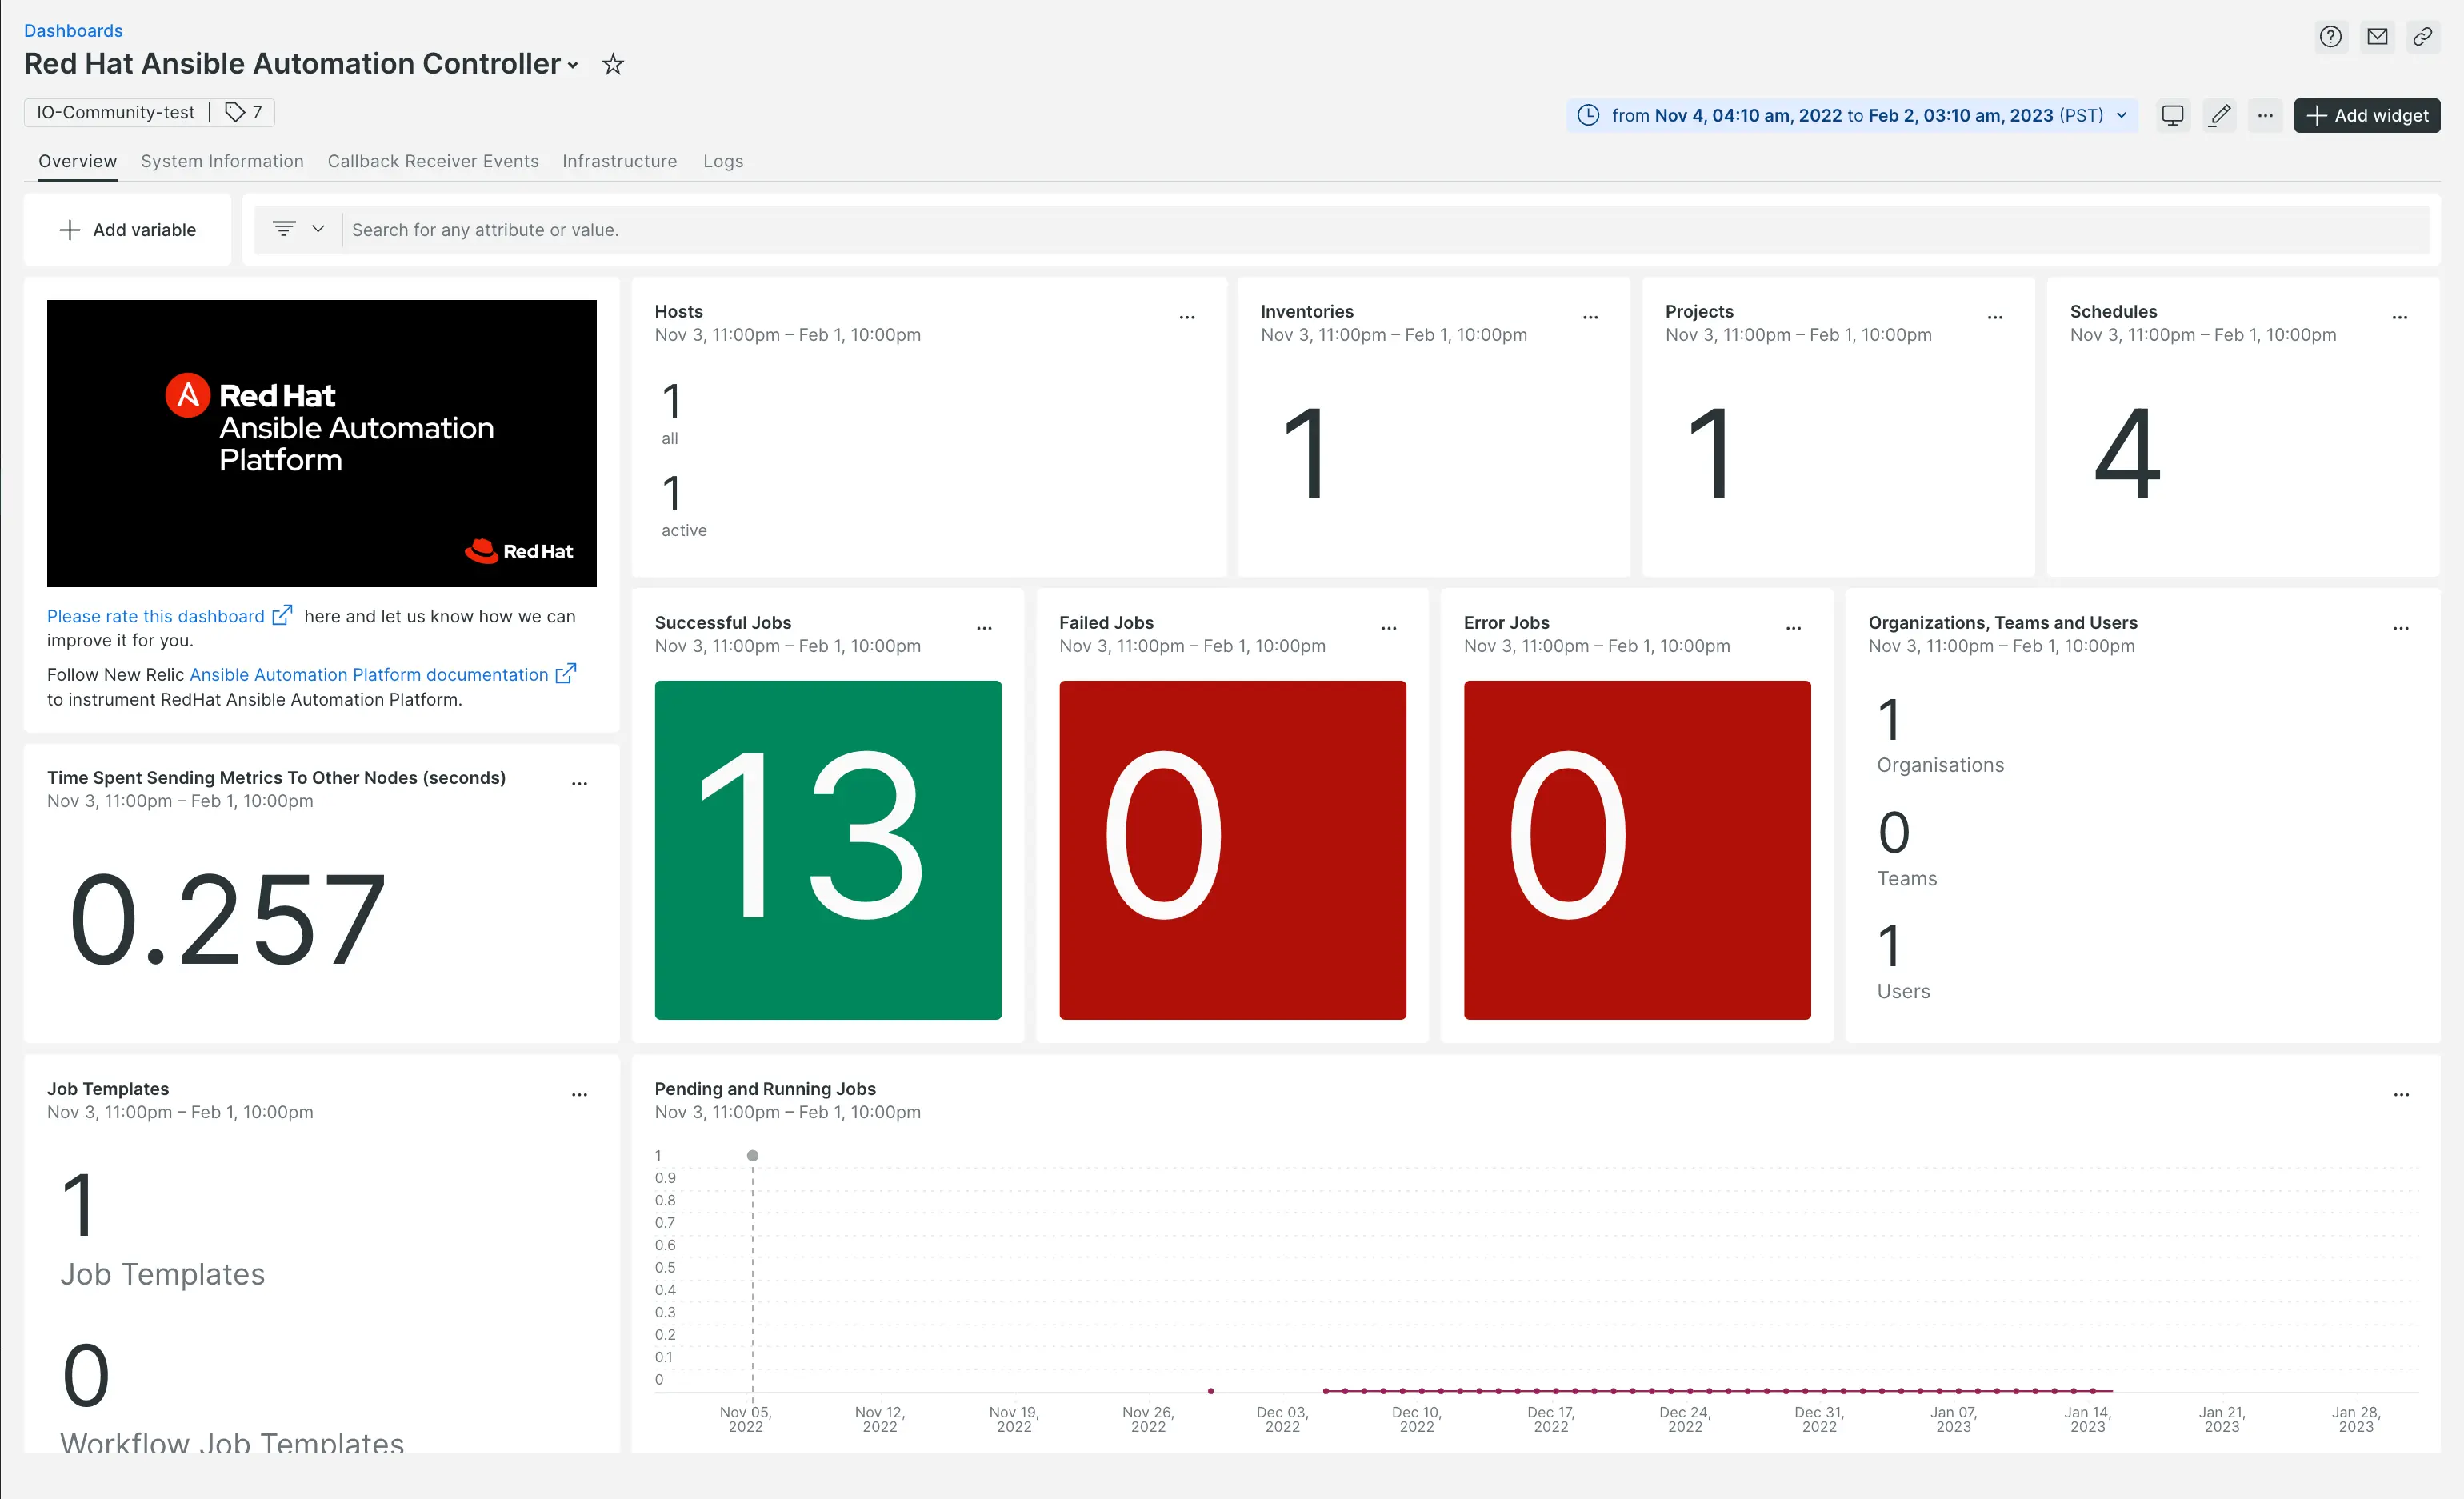 A screenshot depicting the Ansible Controller dashboard